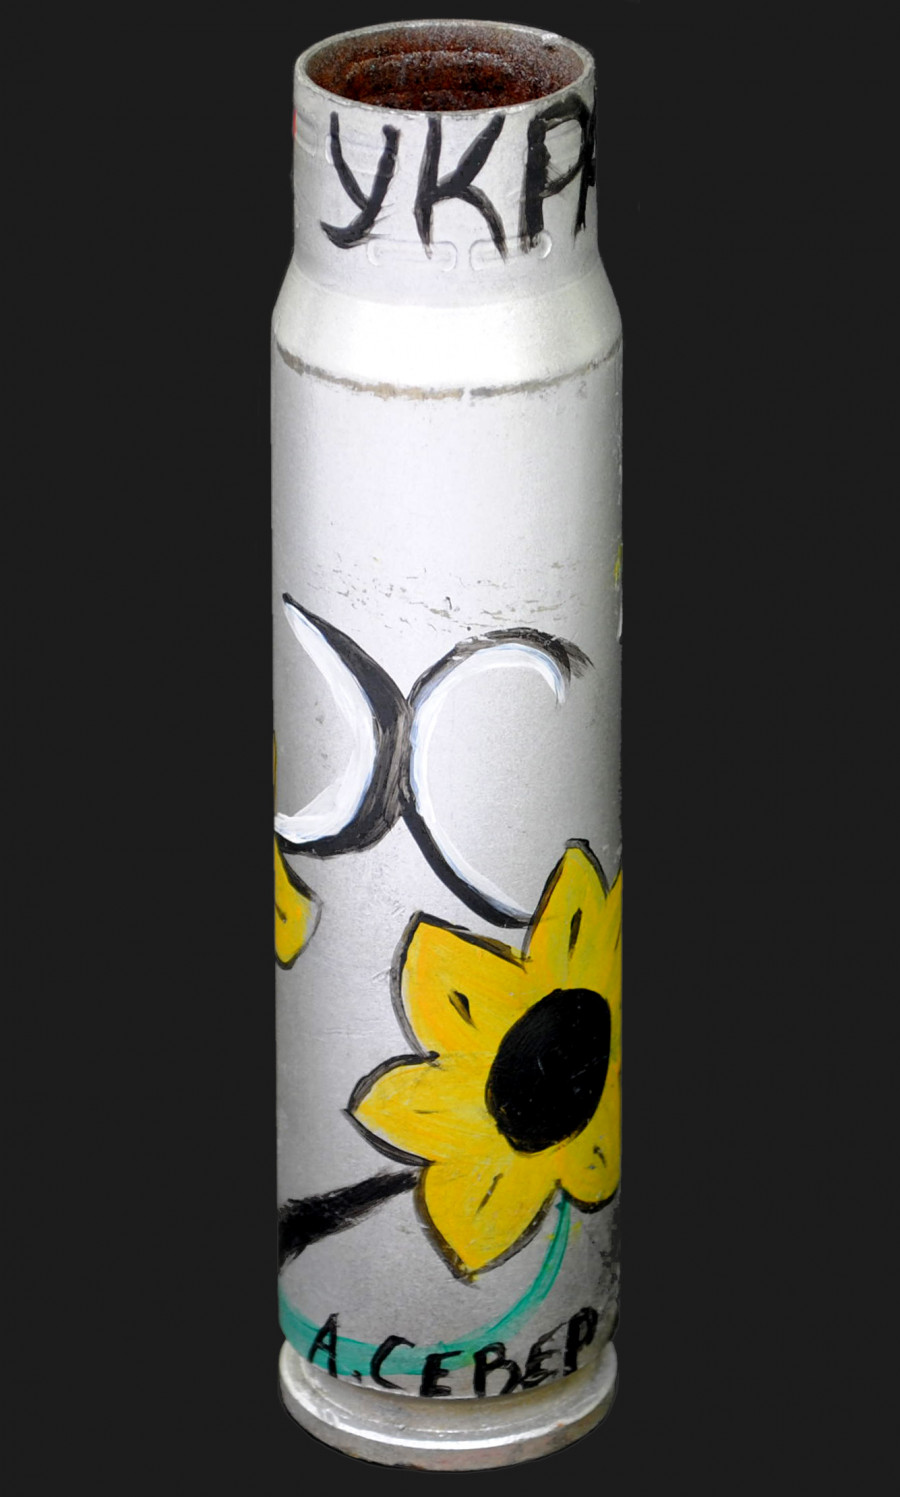  A shell casing with a "Flower" drawn on it